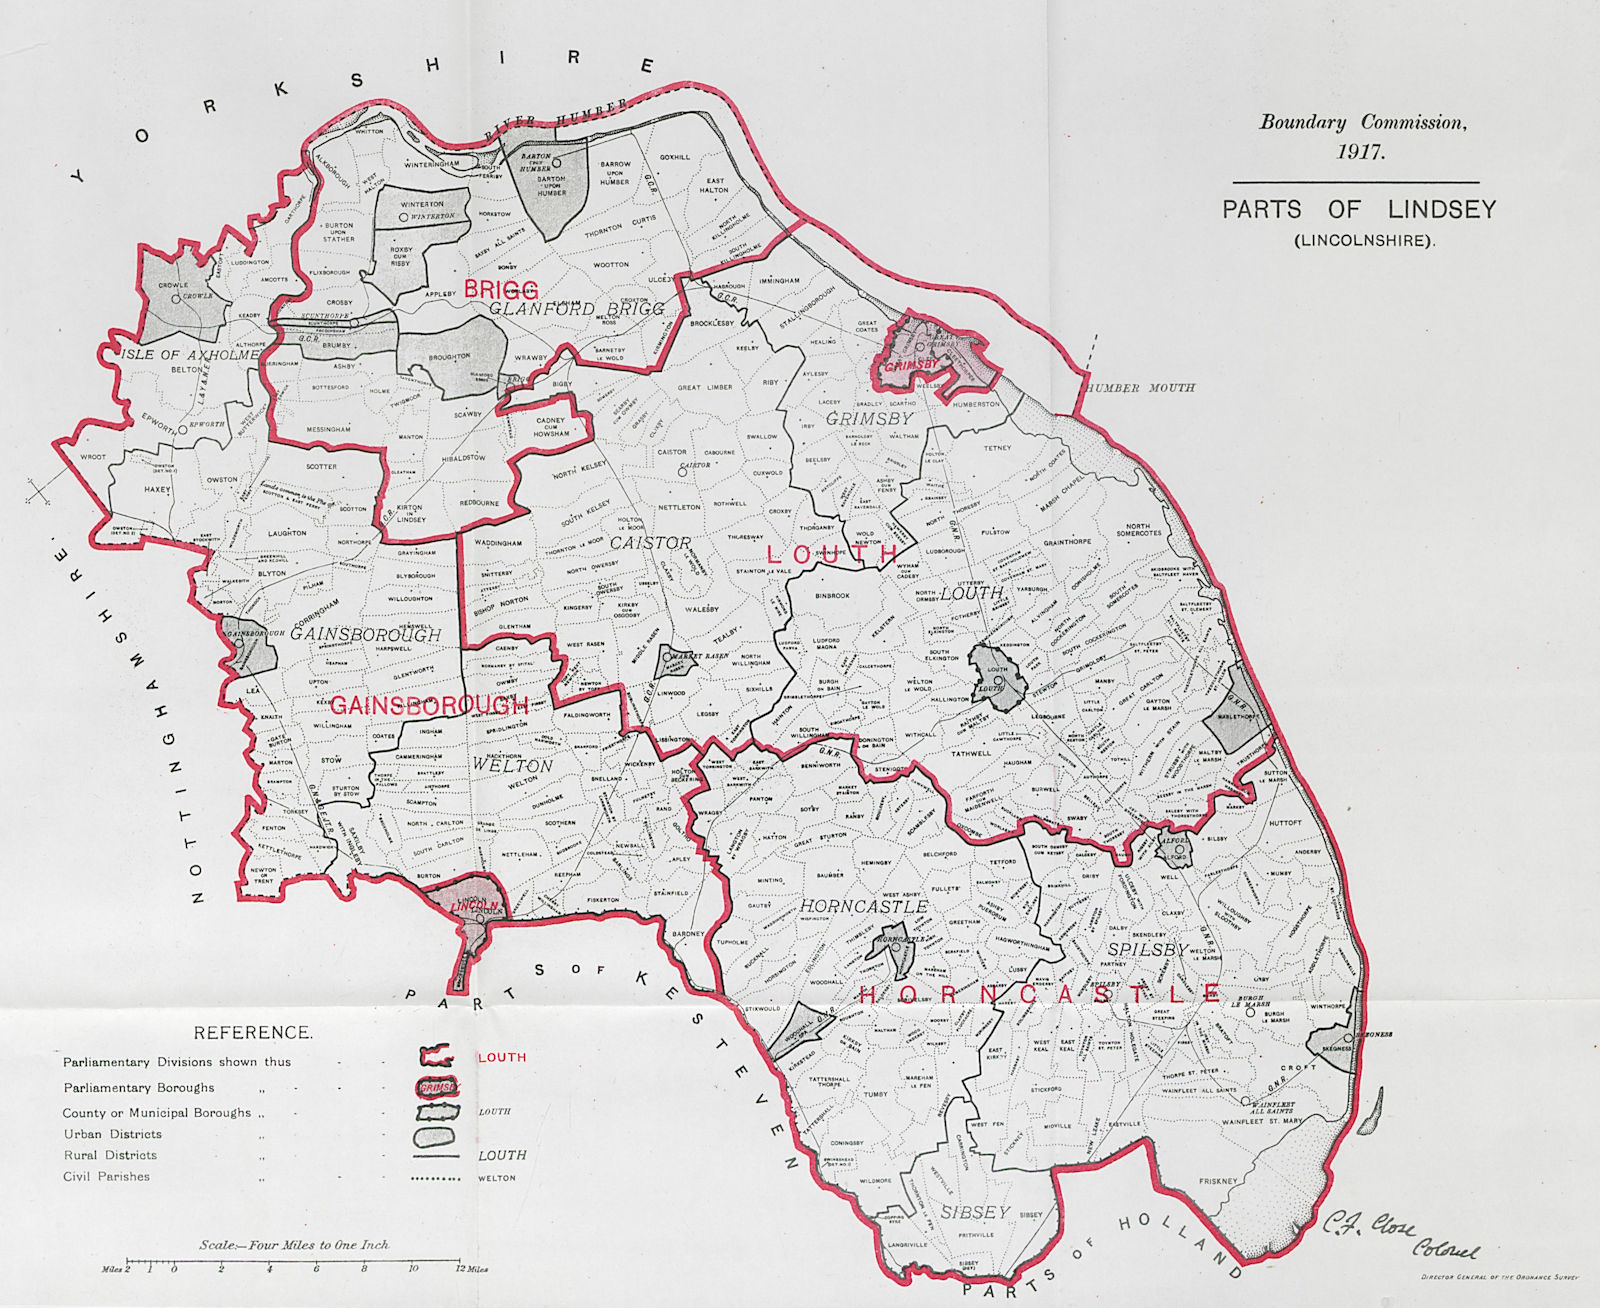 Lindsey parts. Lincolnshire Parliamentary County. BOUNDARY COMMISSION 1917 map